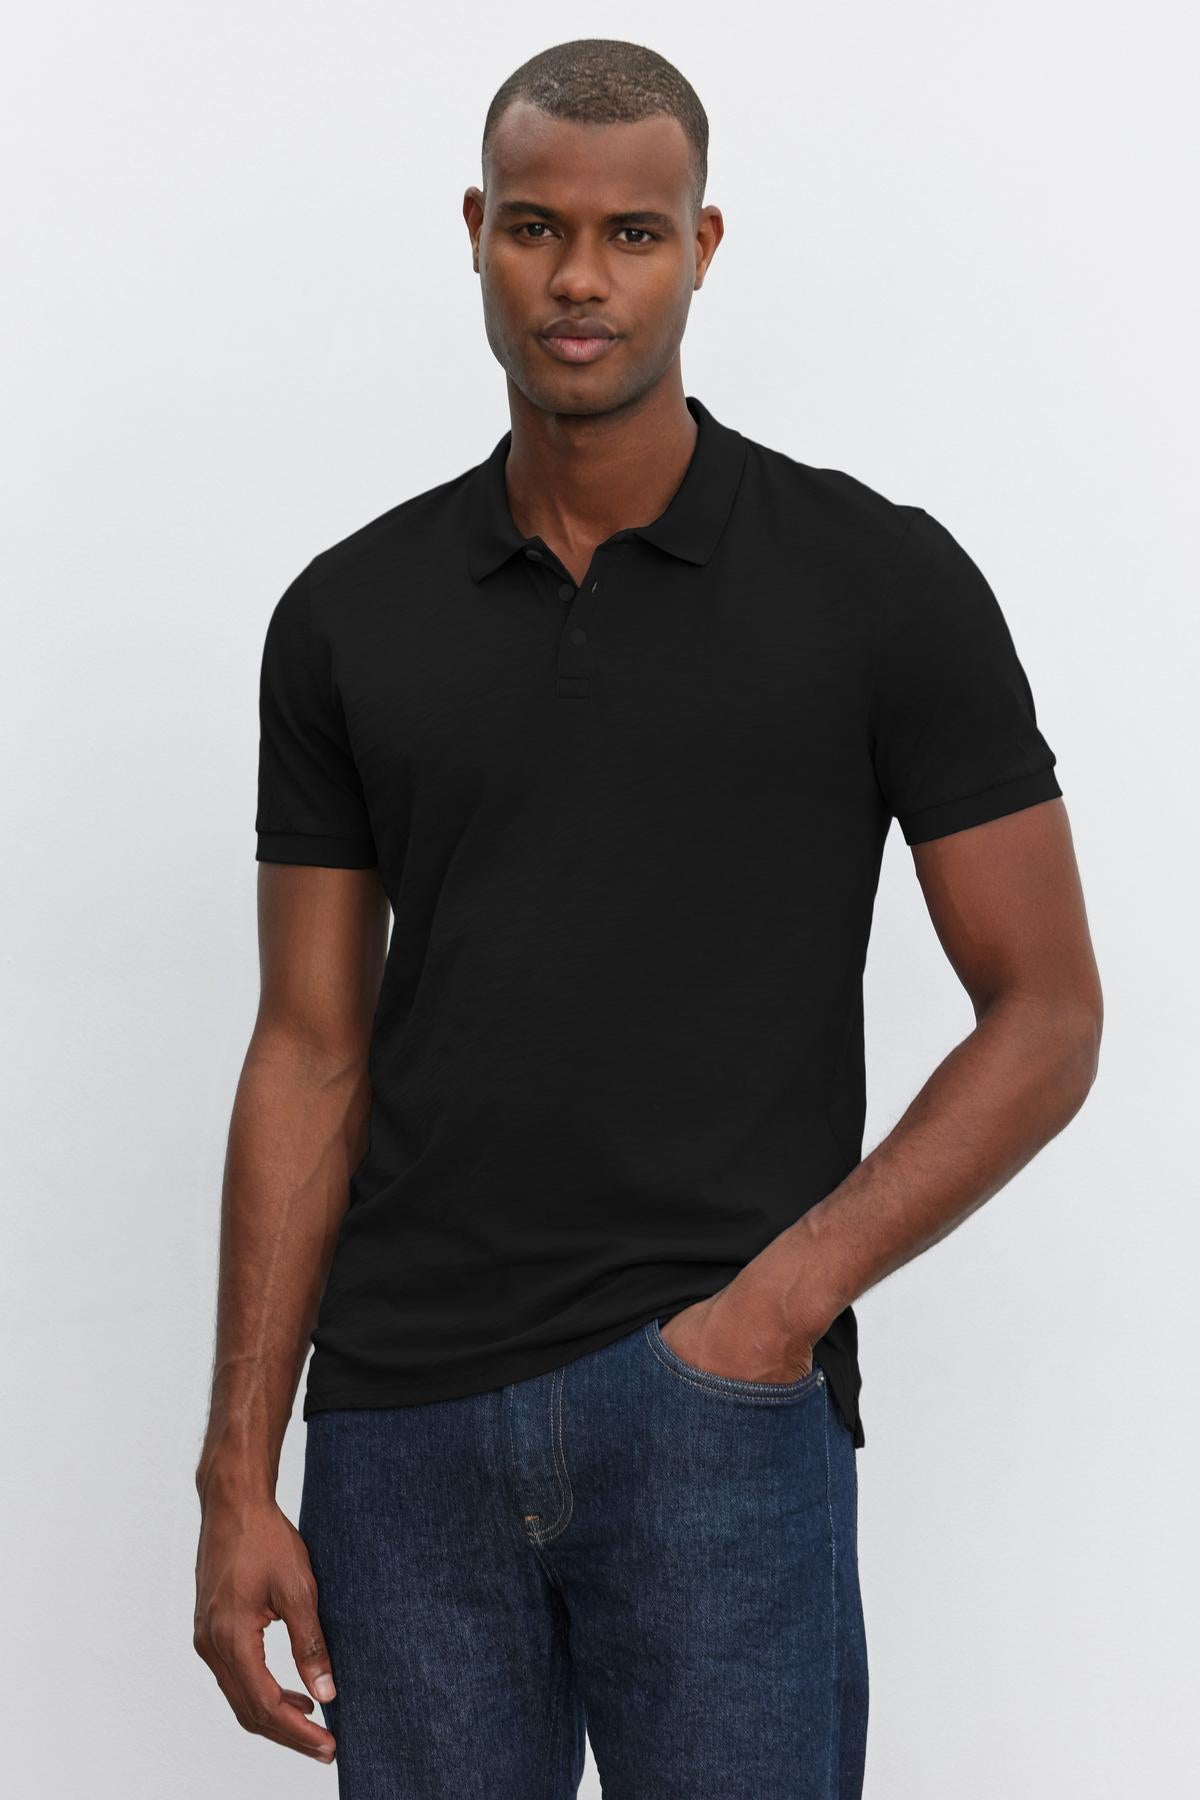 A man wearing a black heathered texture NIKO POLO shirt and blue jeans standing against a white background, looking at the camera with a neutral expression. (Brand Name: Velvet by Graham & Spencer)-36890752843969